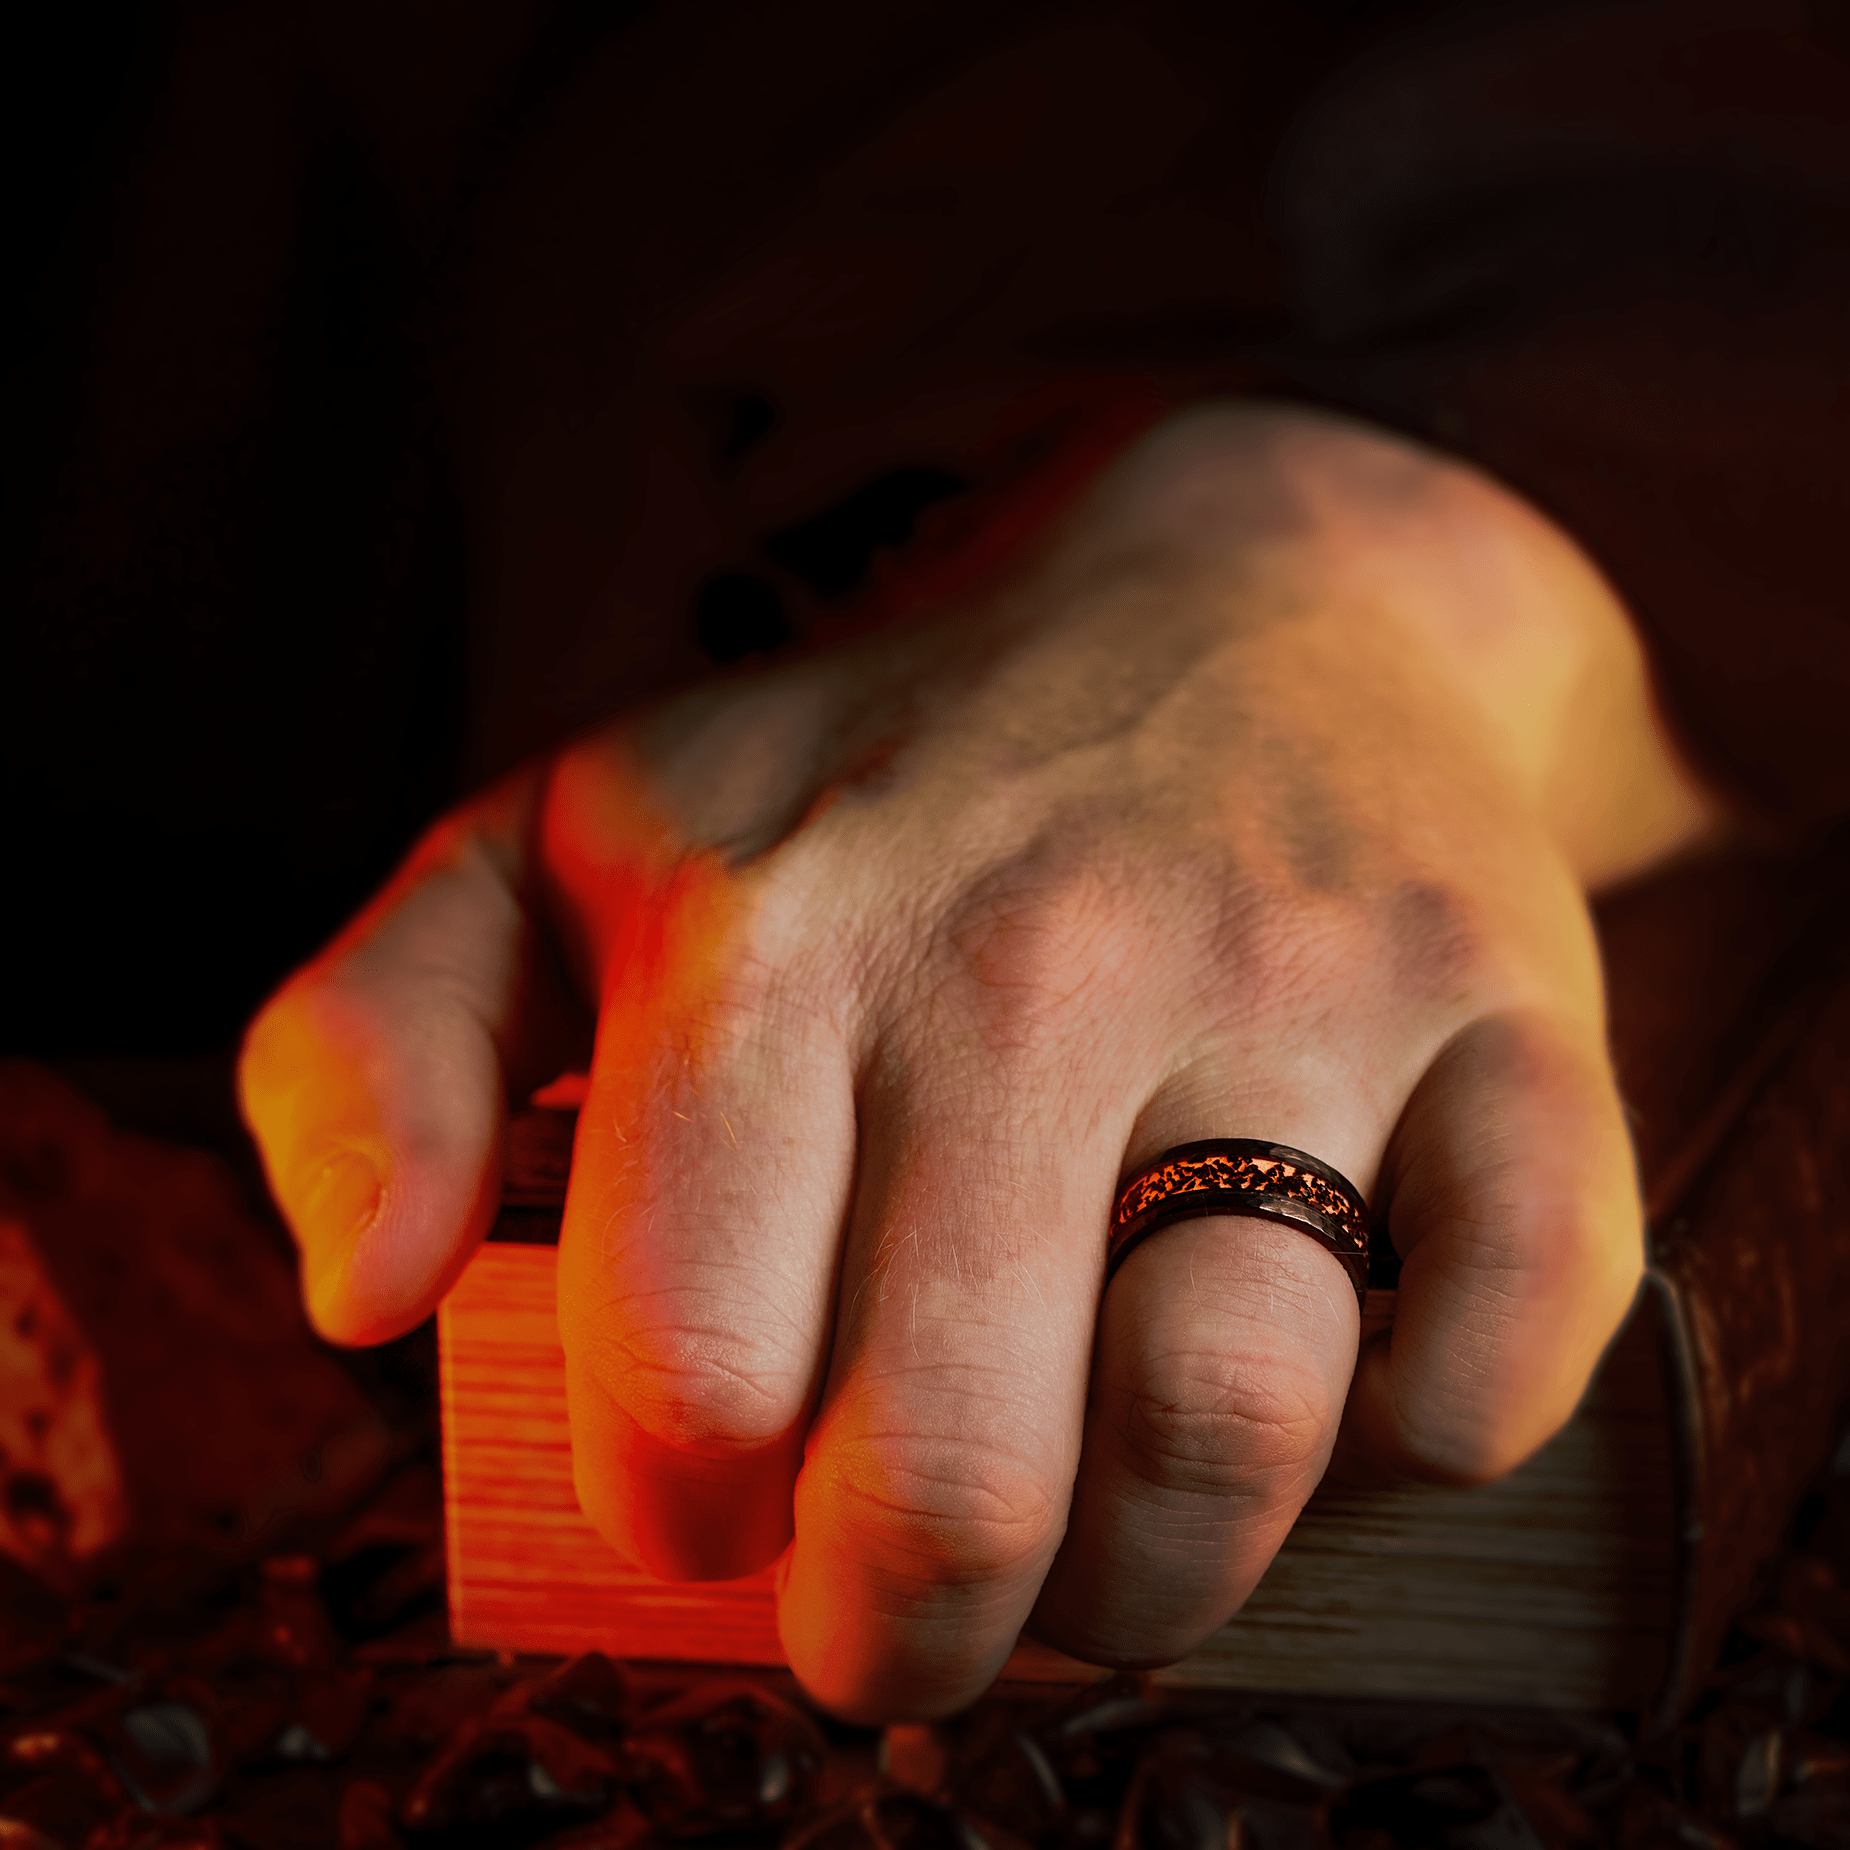 The Sauron™️ - Men's Wedding Rings - Manly Bands